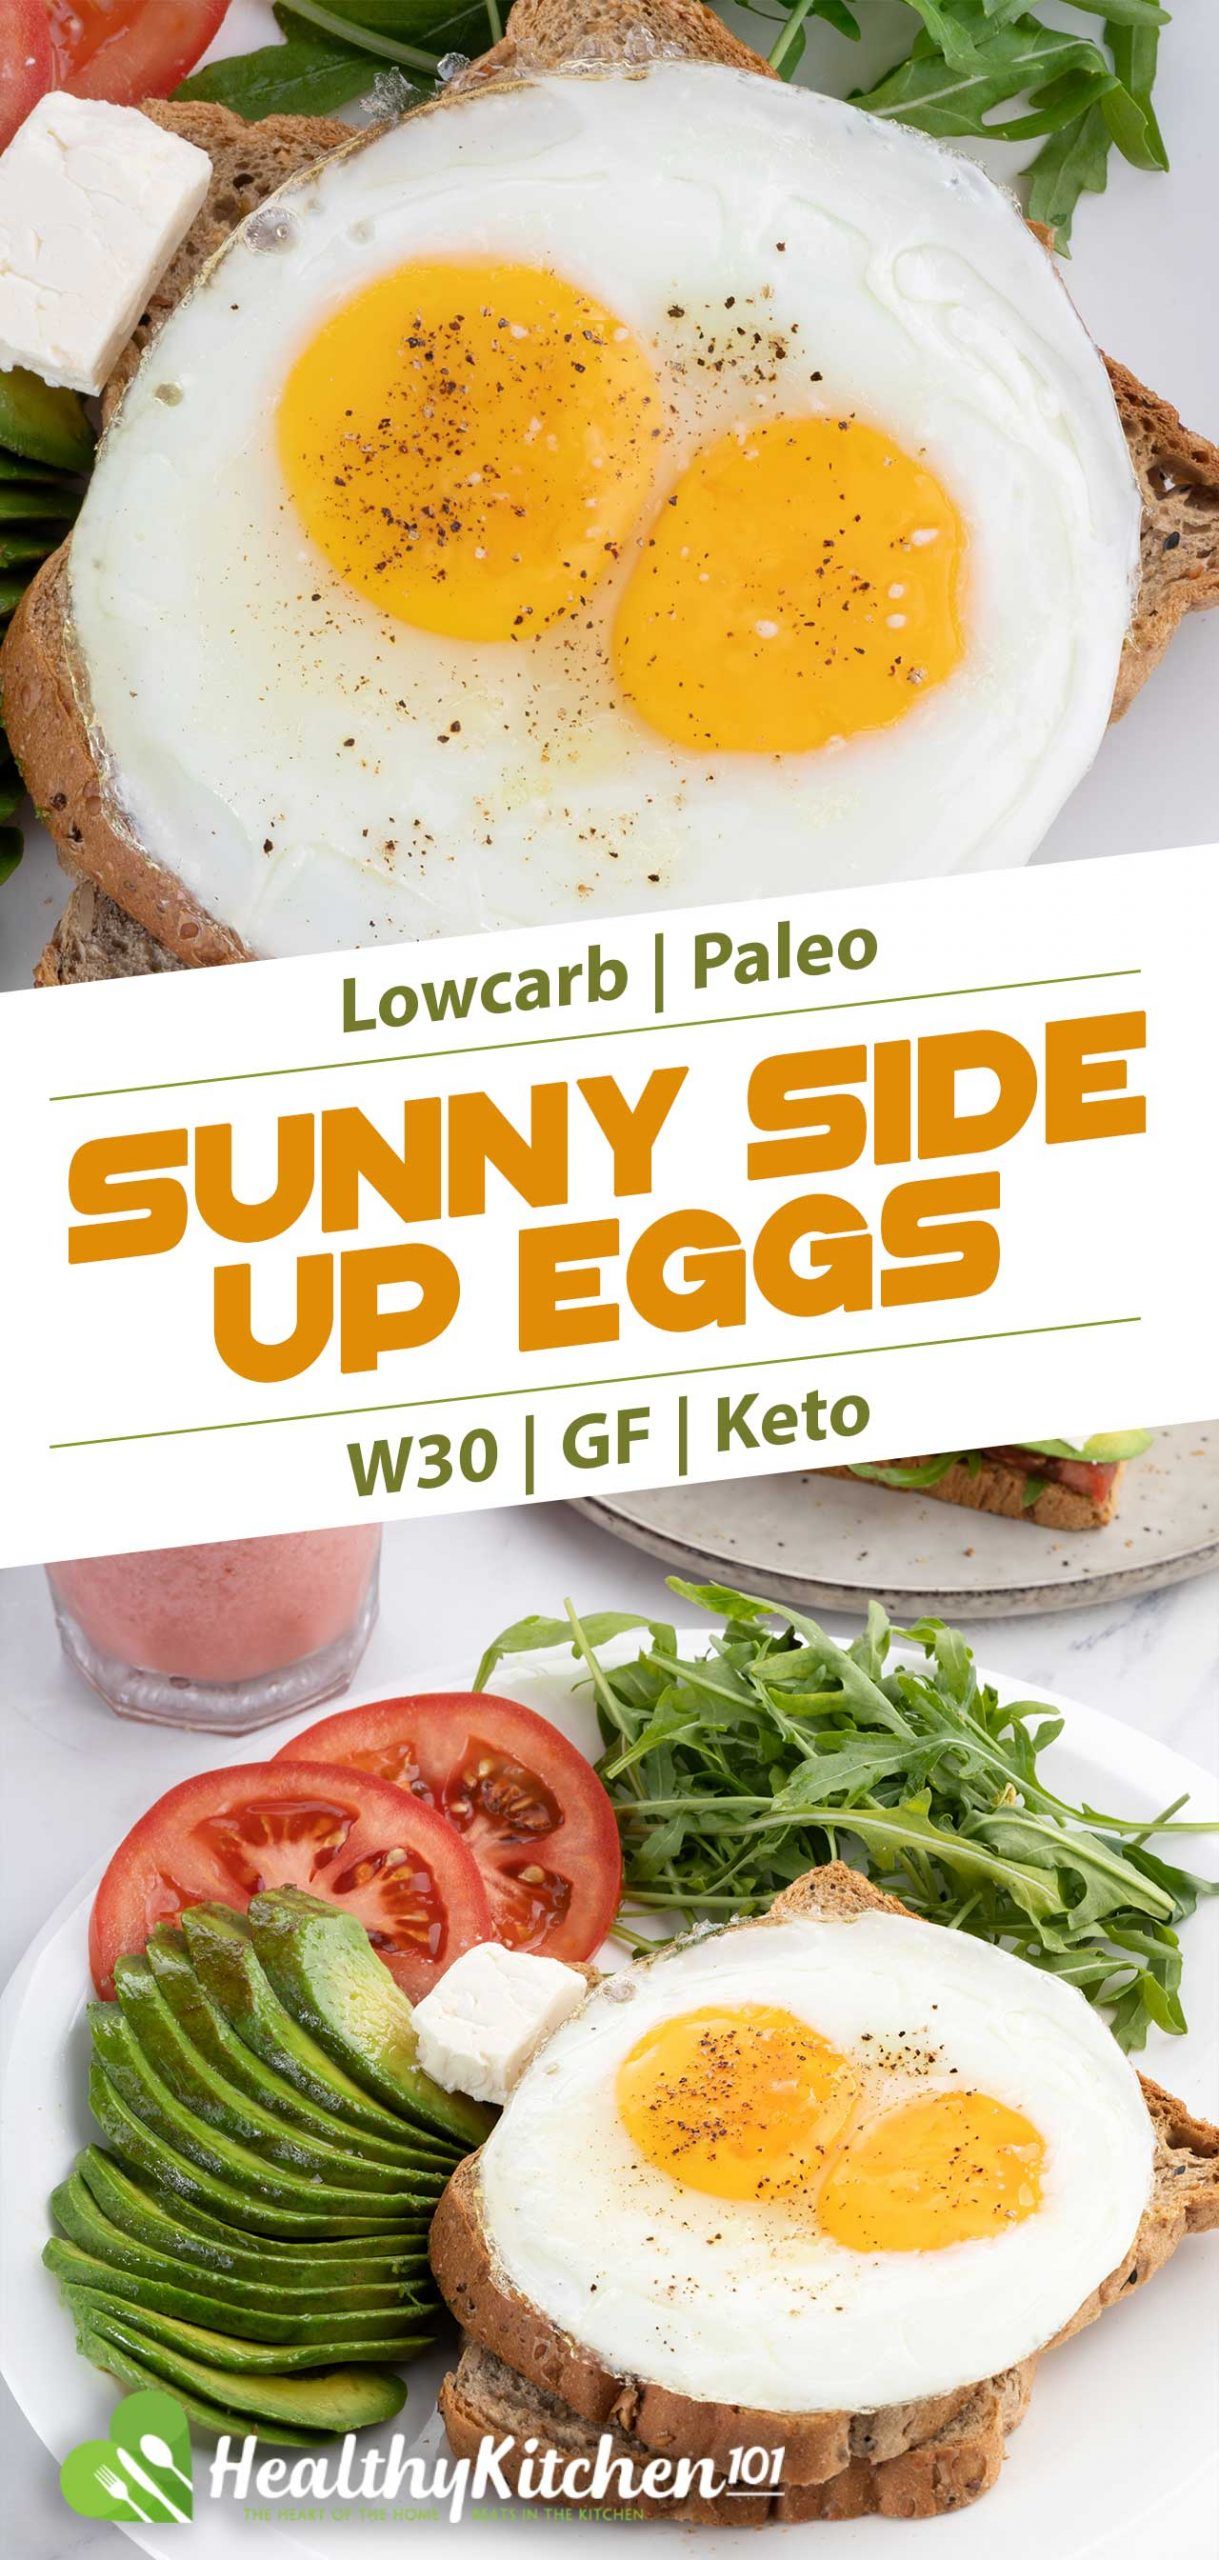 Sunny side up eggs recipe - a healthy addition for your breakfast and fits almost every diet